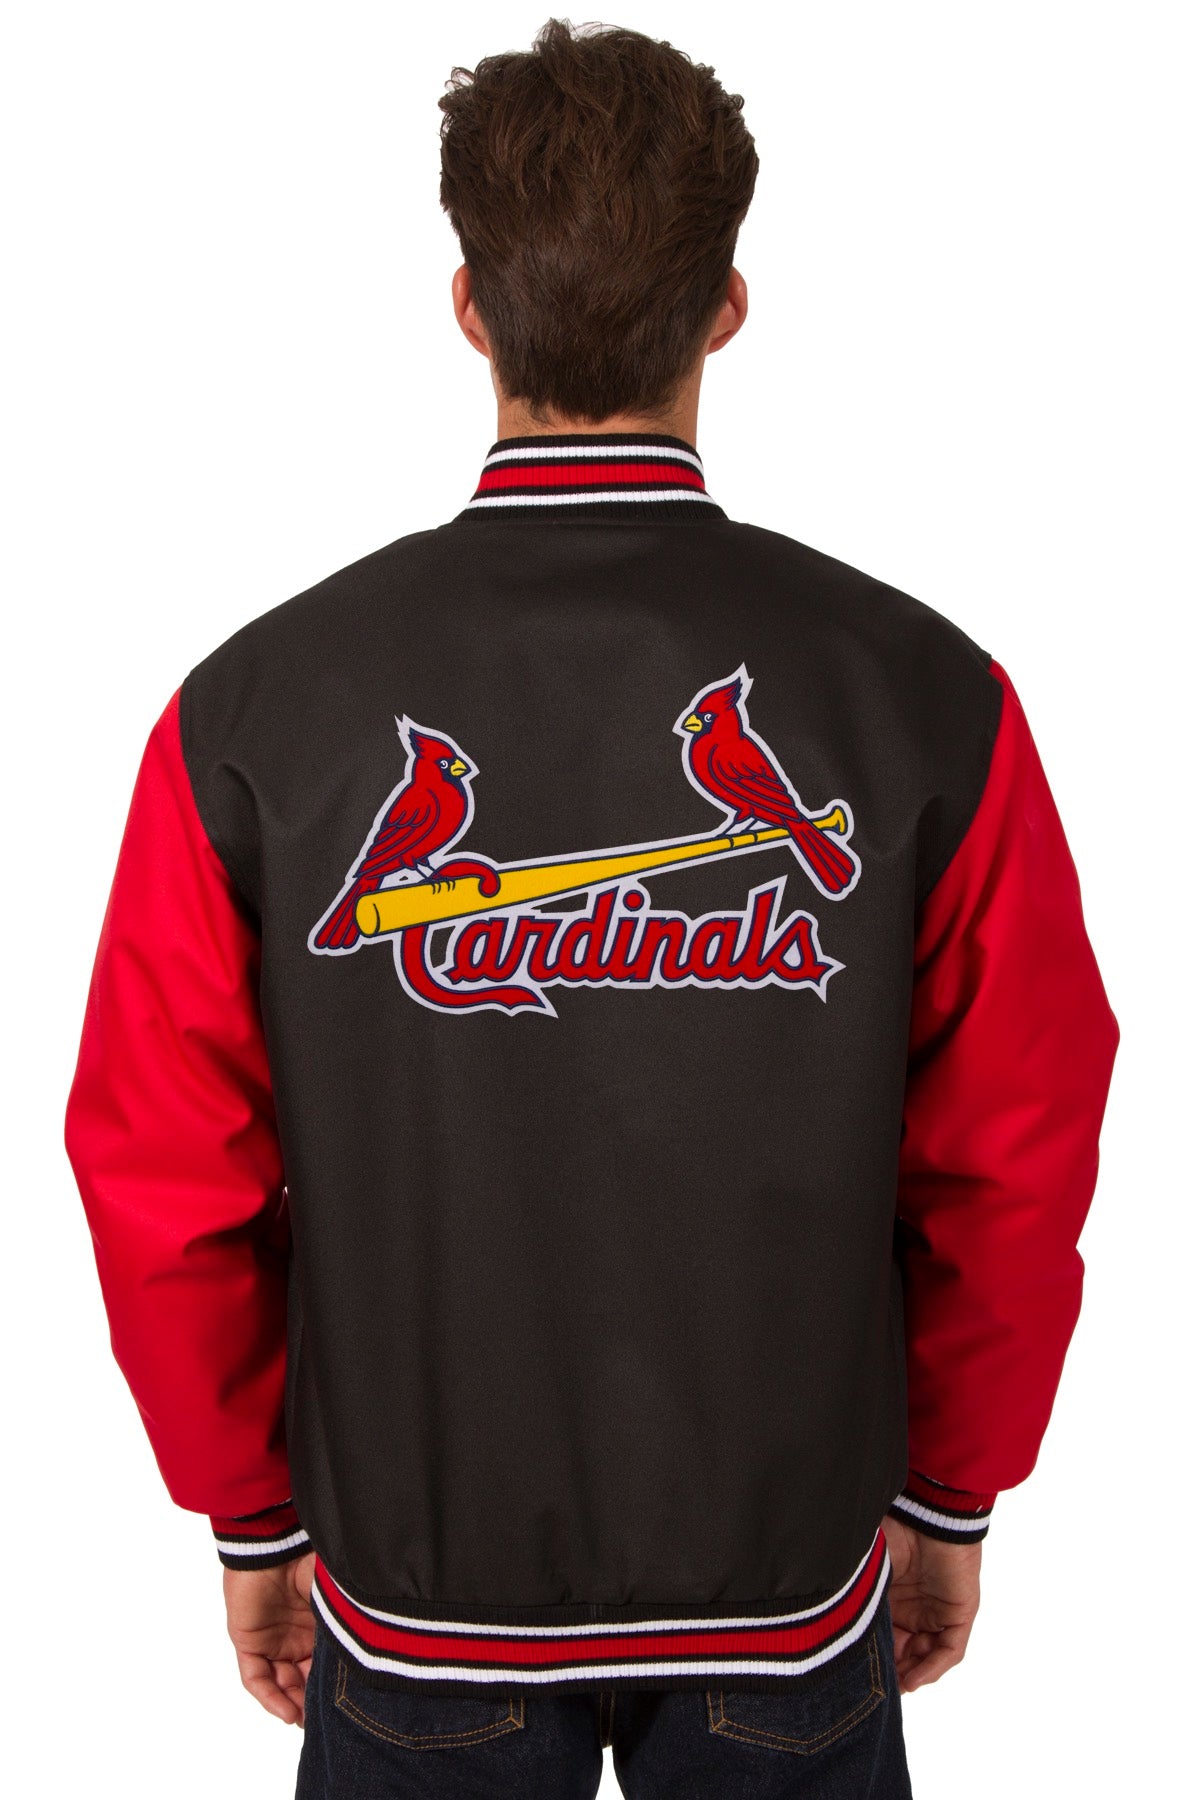 JH Design St. Louis Cardinals Poly Twill Varsity Jacket - Red 4X-Large